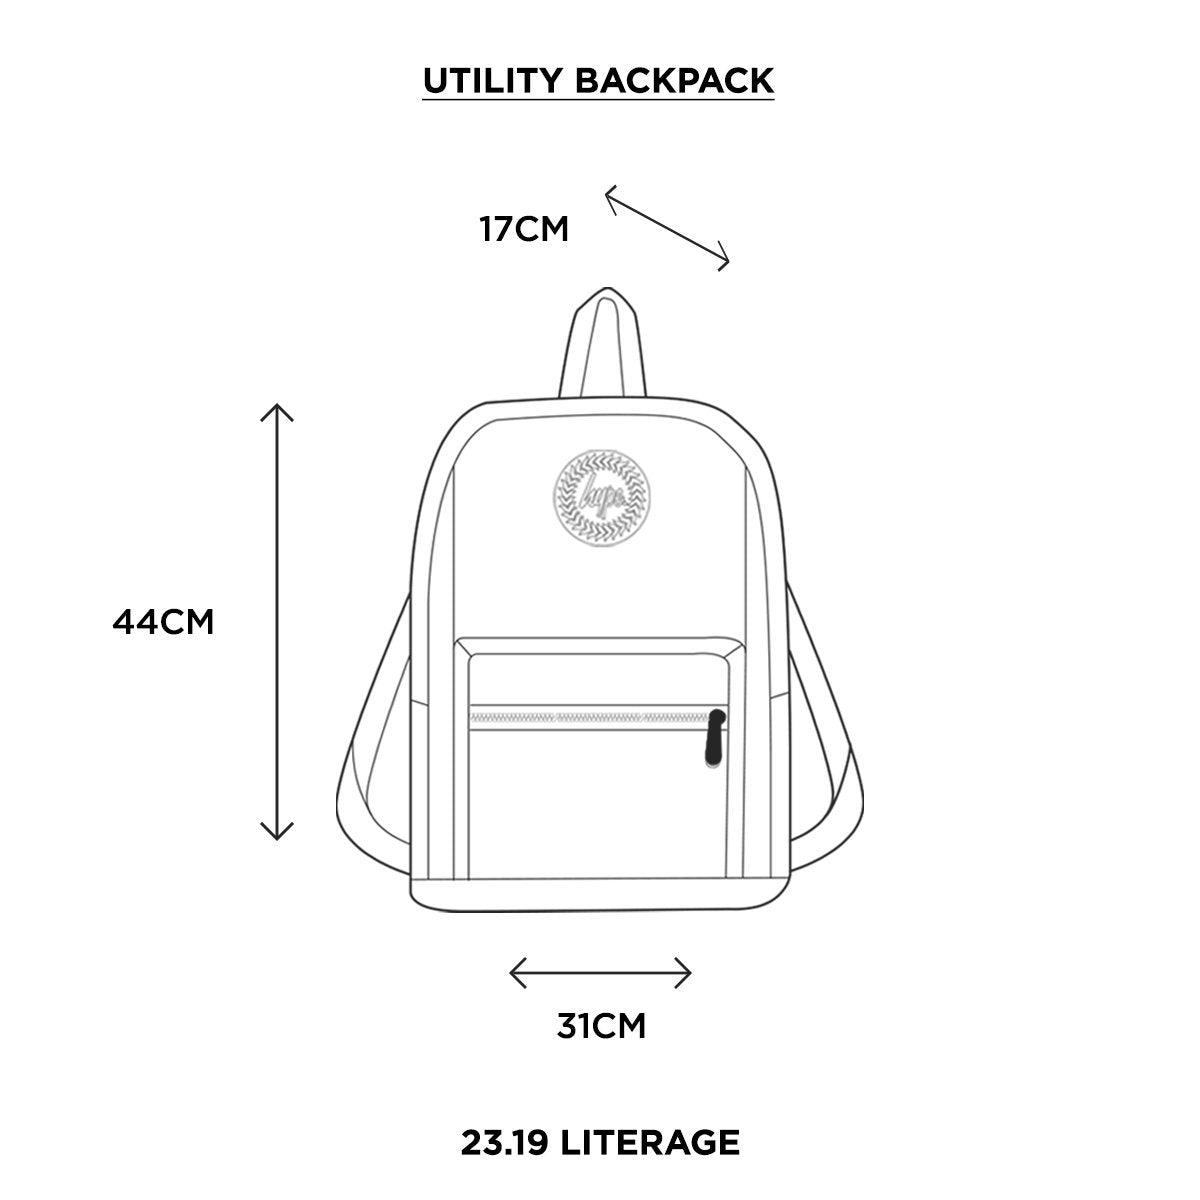 HYPE NAVY UTILITY BACKPACK